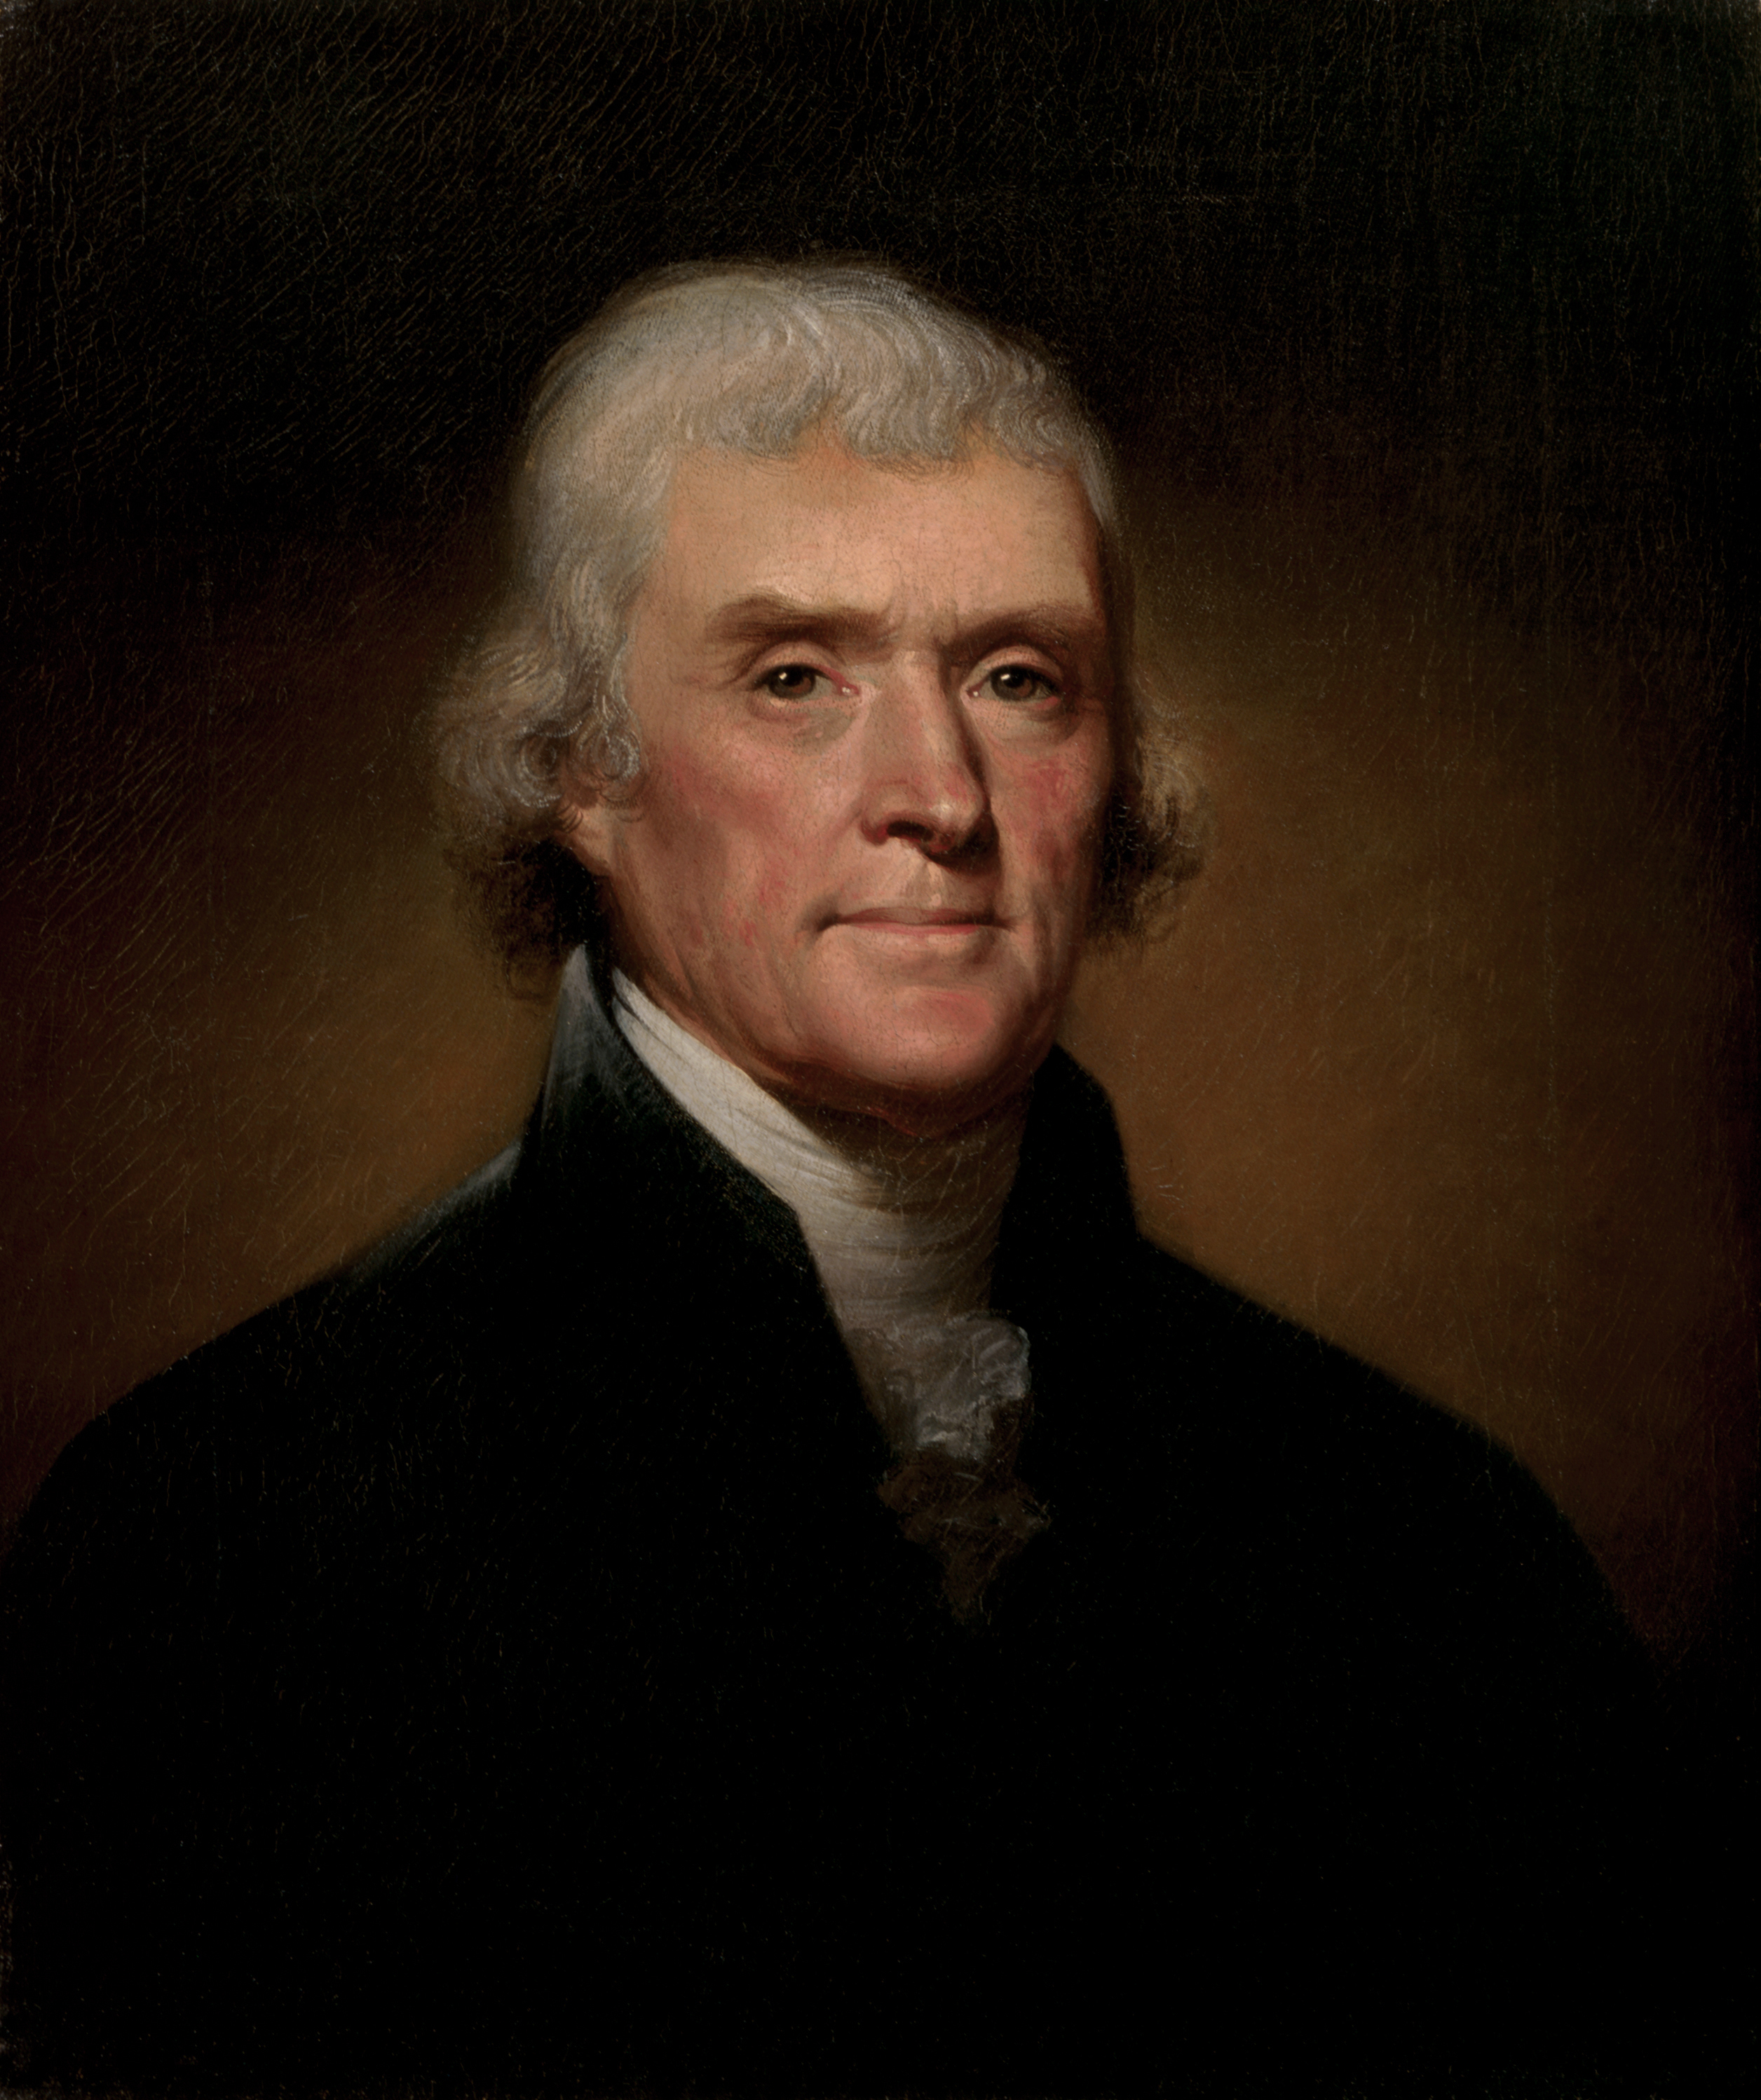 Official_Presidential_portrait_of_Thomas_Jefferson_(by_Rembrandt_Peale,_1800).jpg